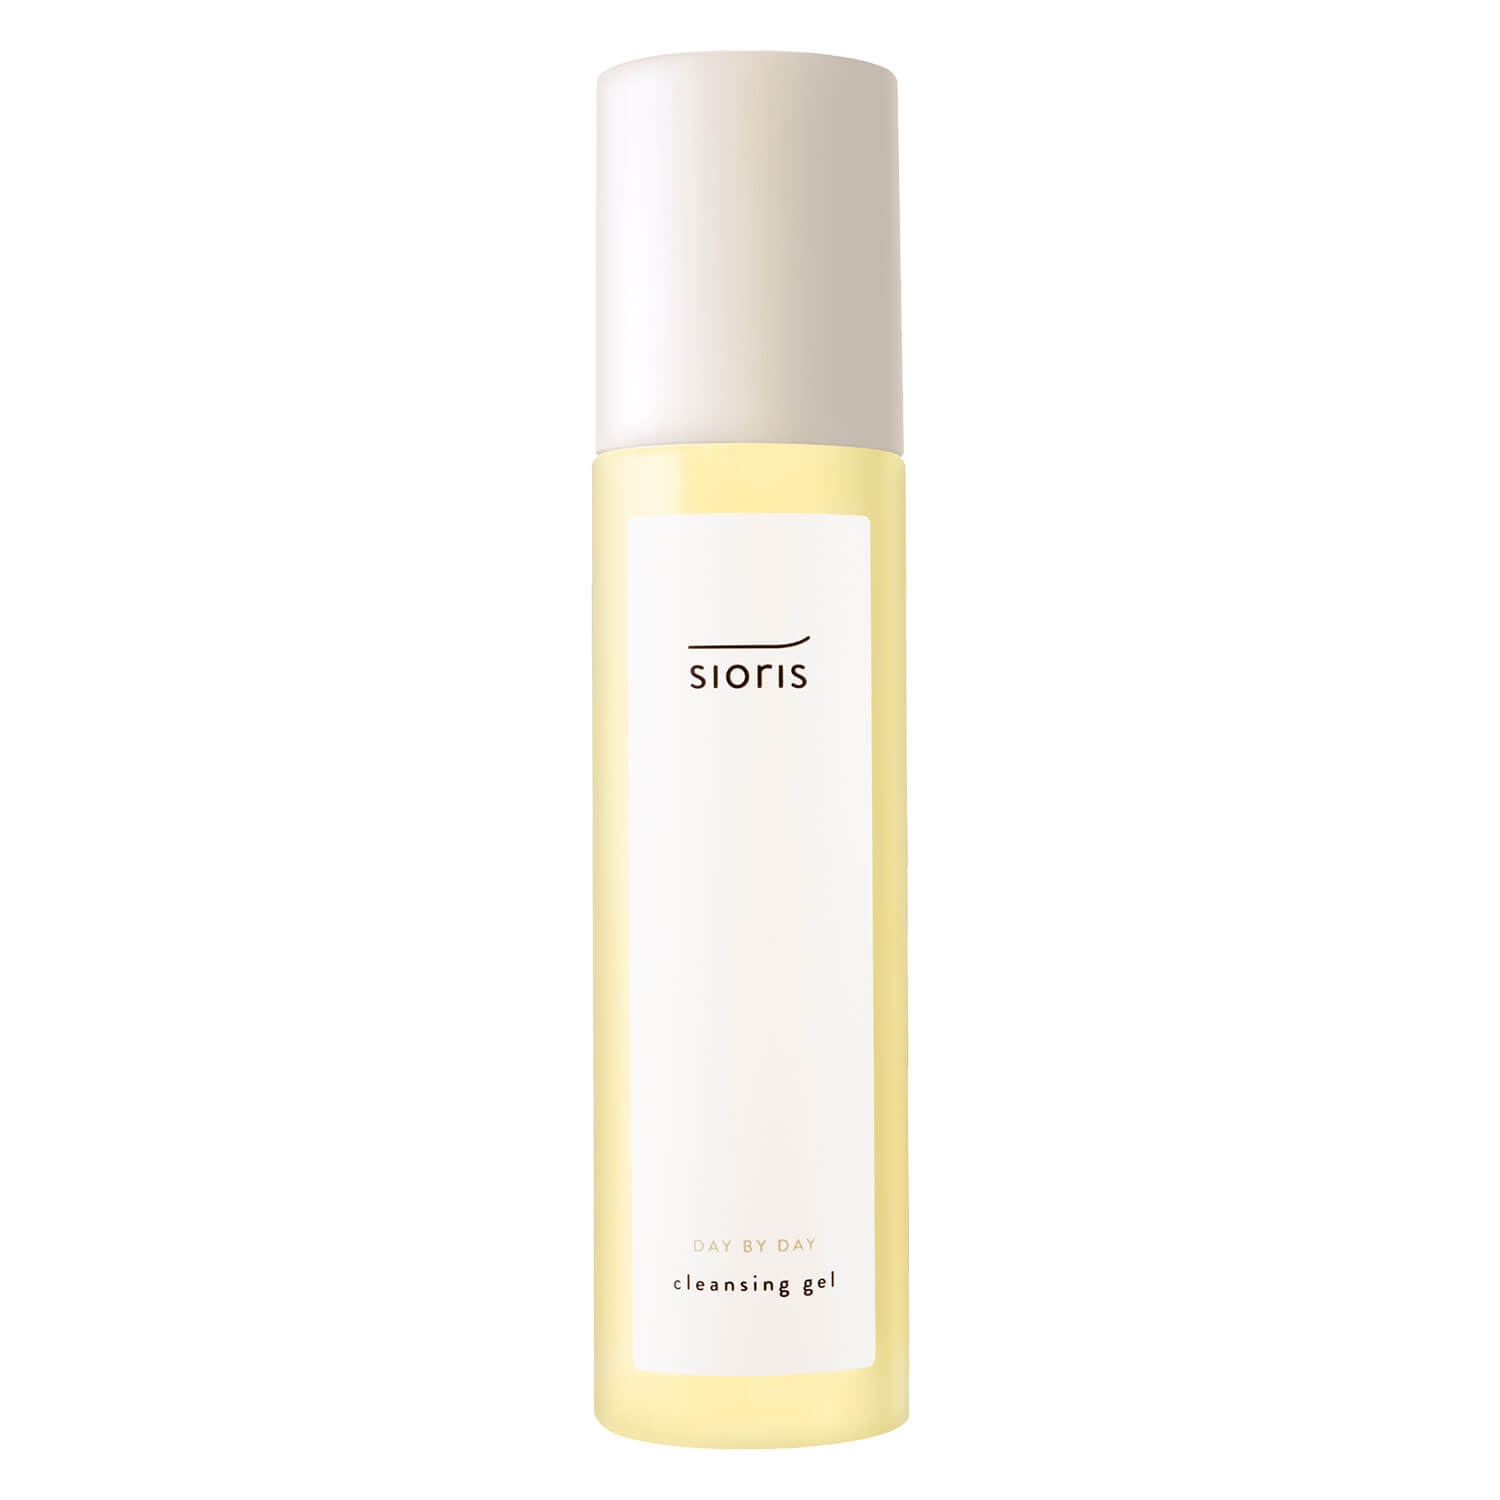 Product image from sioris - DAY BY DAY cleansing gel